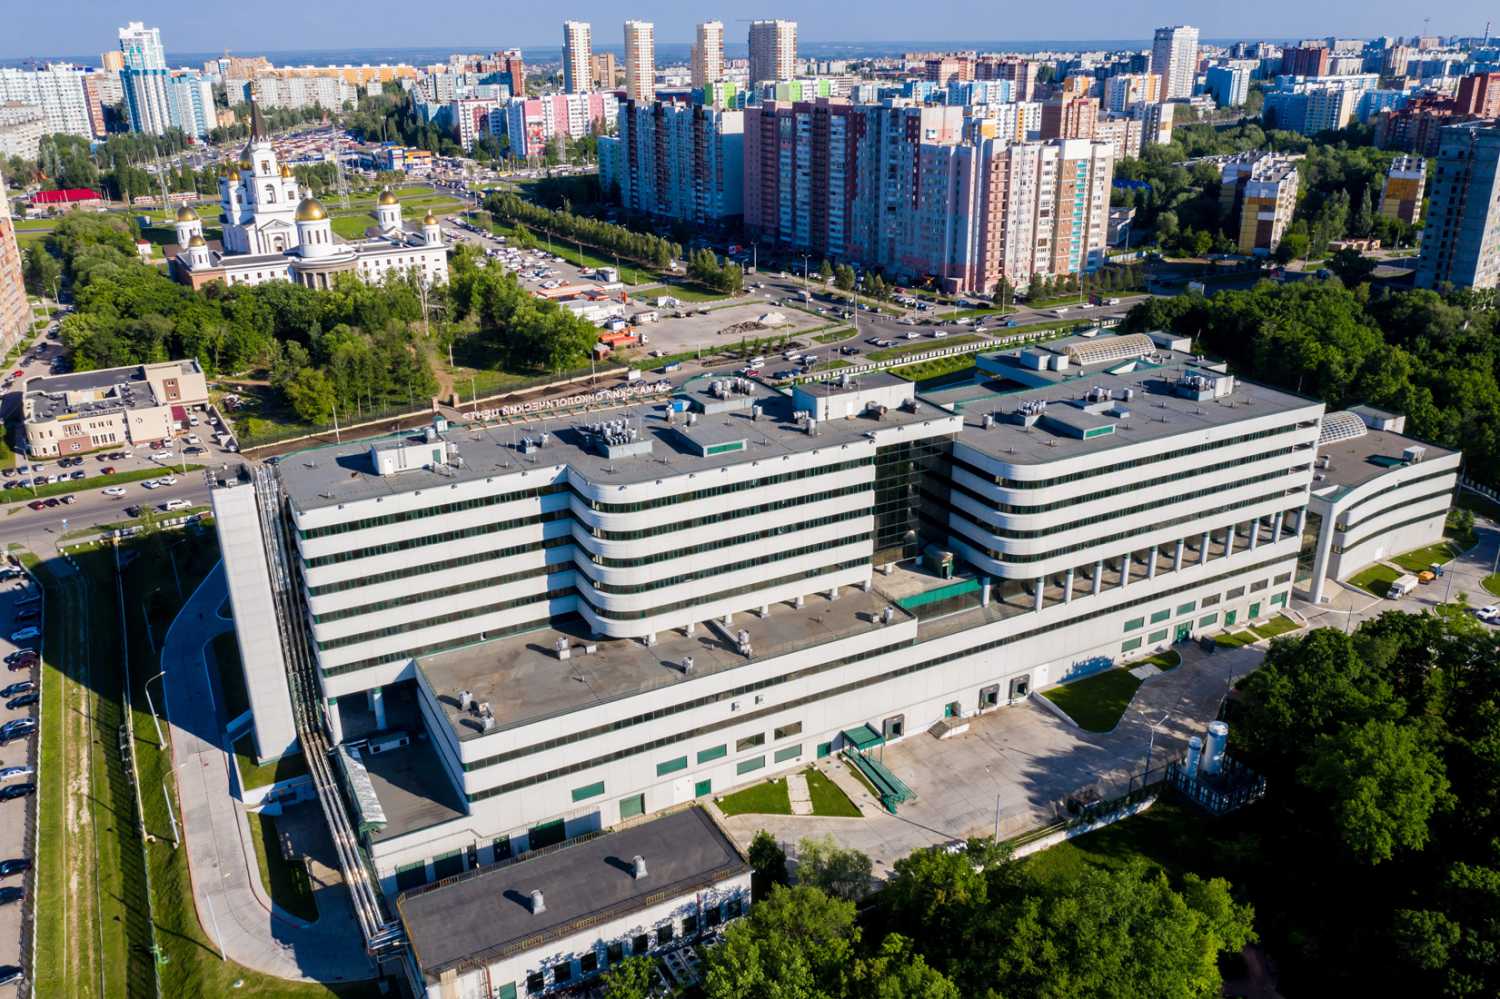 The 11-storey hospital encompasses 11,000sq.m with beds for up to 350 patients